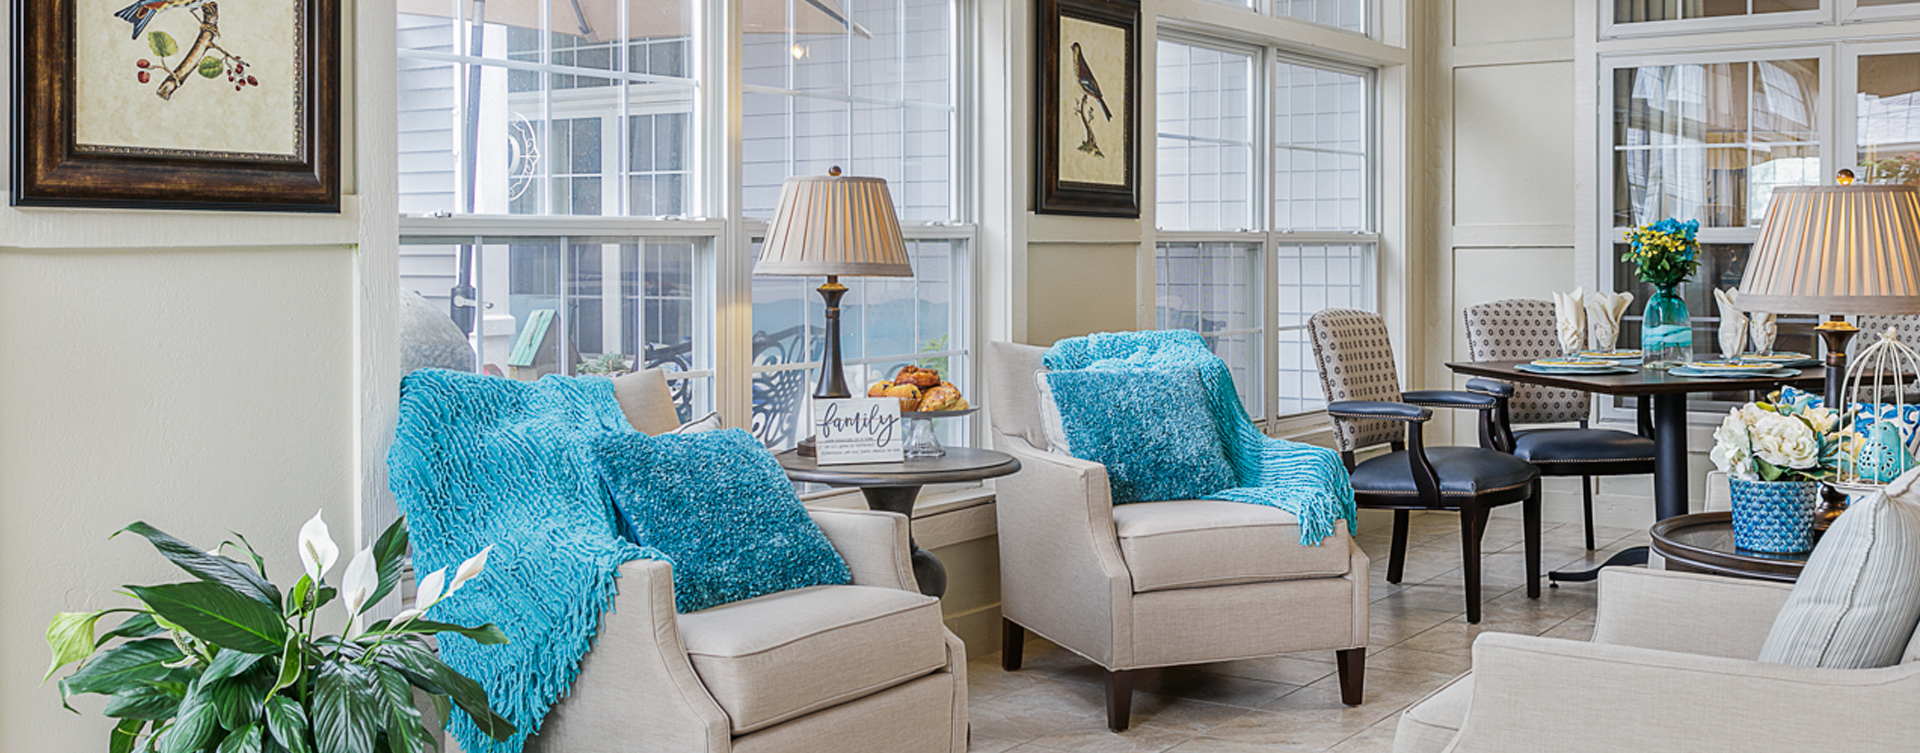 Curl up with a good book in the sunroom at Bickford of Omaha - Blondo